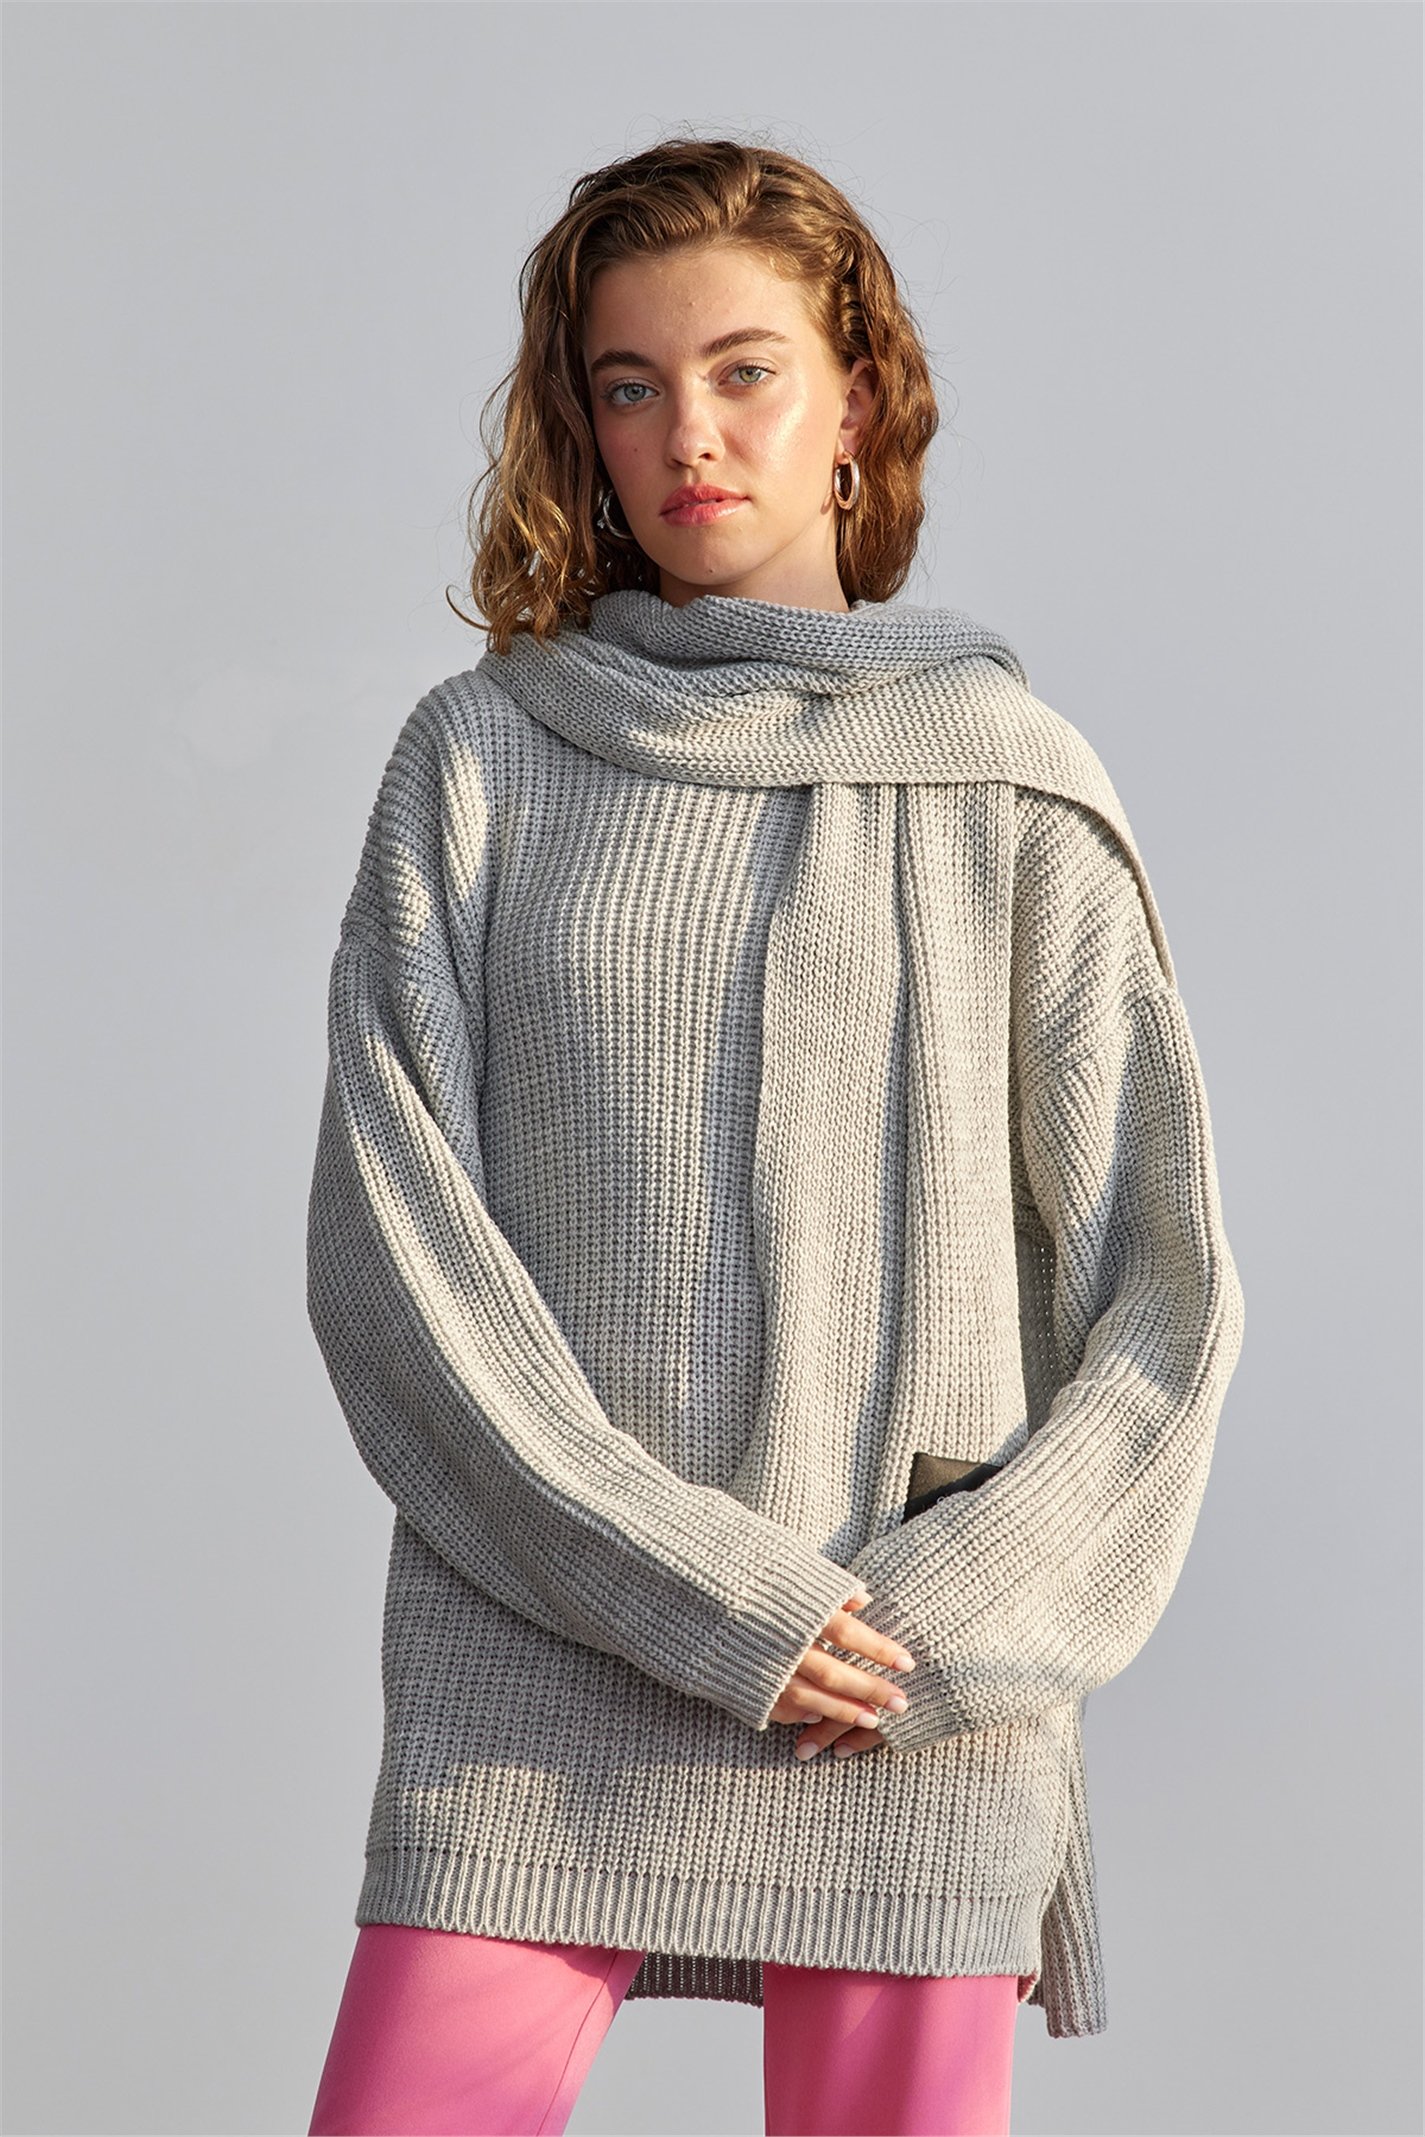 Gray Oversize Knitwear Sweater | Suud Collection